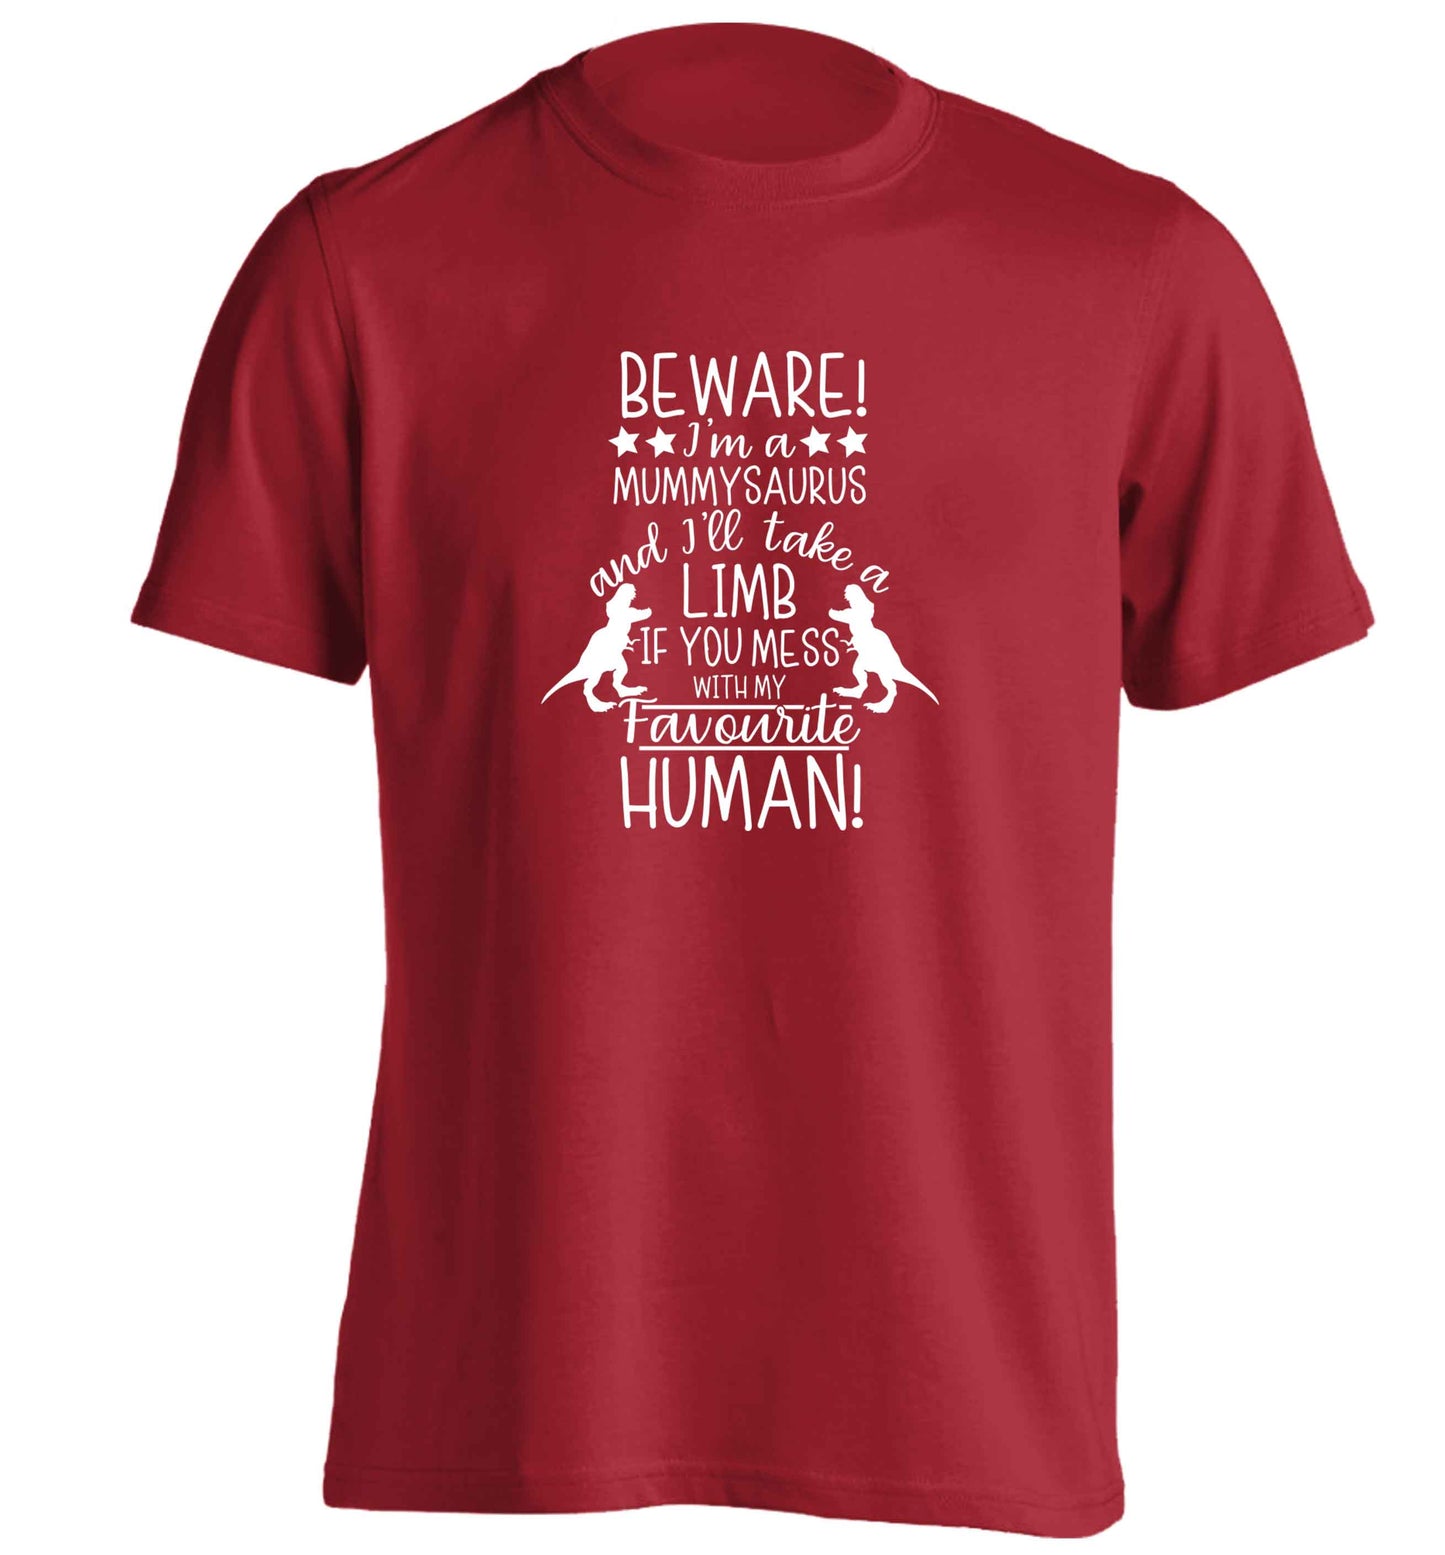 Perfect gift for any protective mummysaurus! Beware I'm a mummysaurus and I'll take a limb if you mess with my favourite human adults unisex red Tshirt 2XL